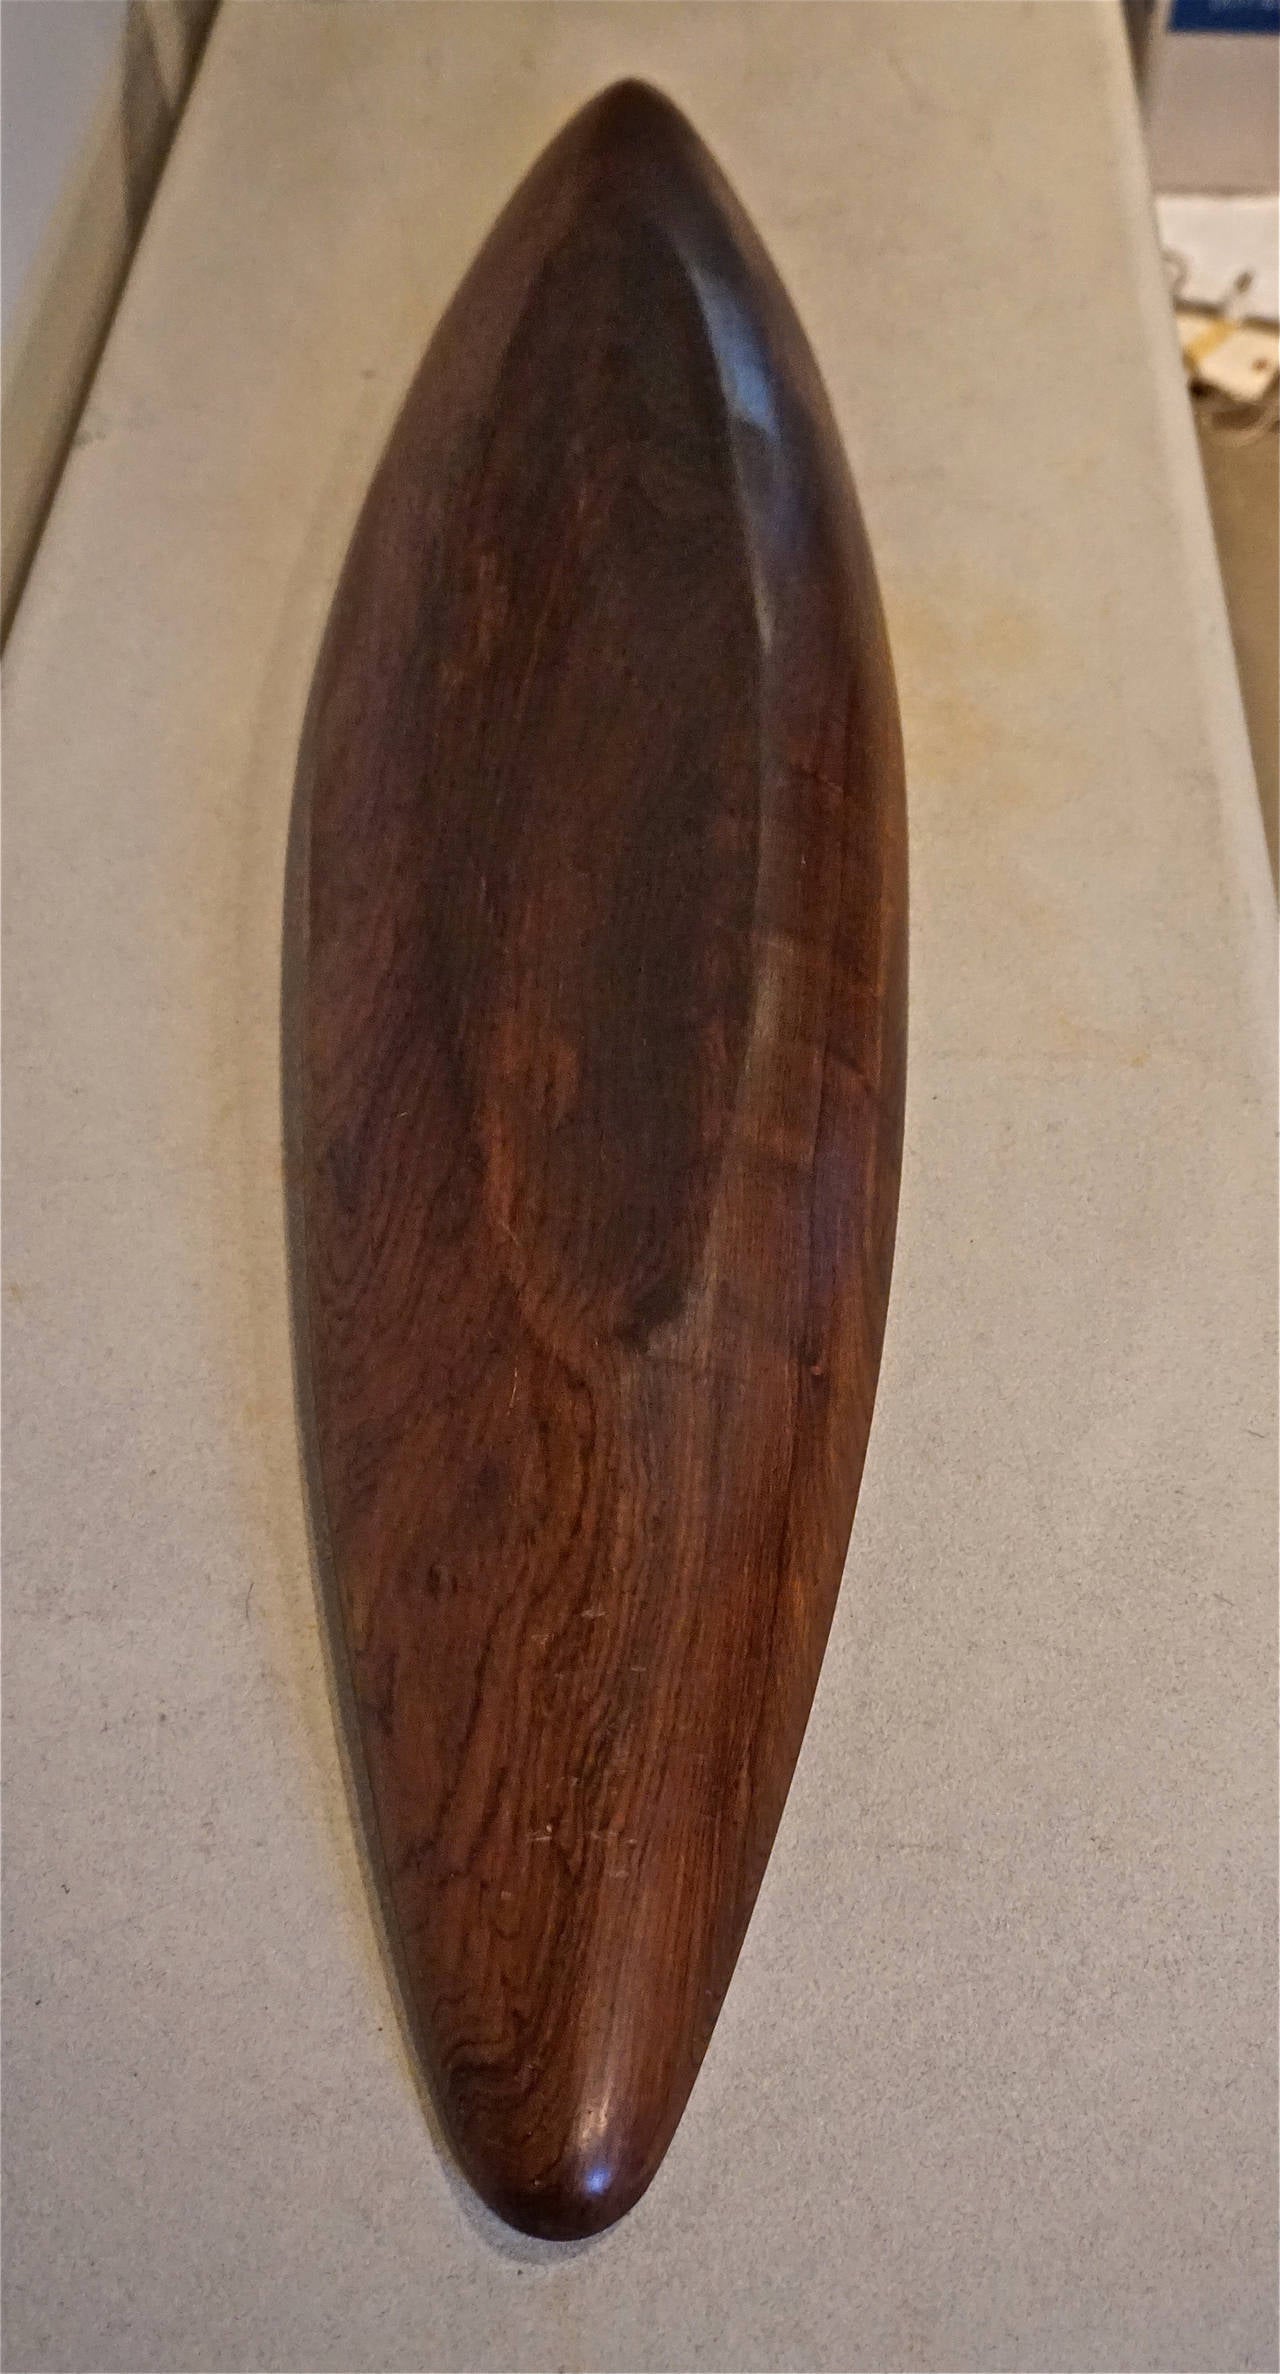 Brazilian Rosewood Bowl from the Lunning Collection